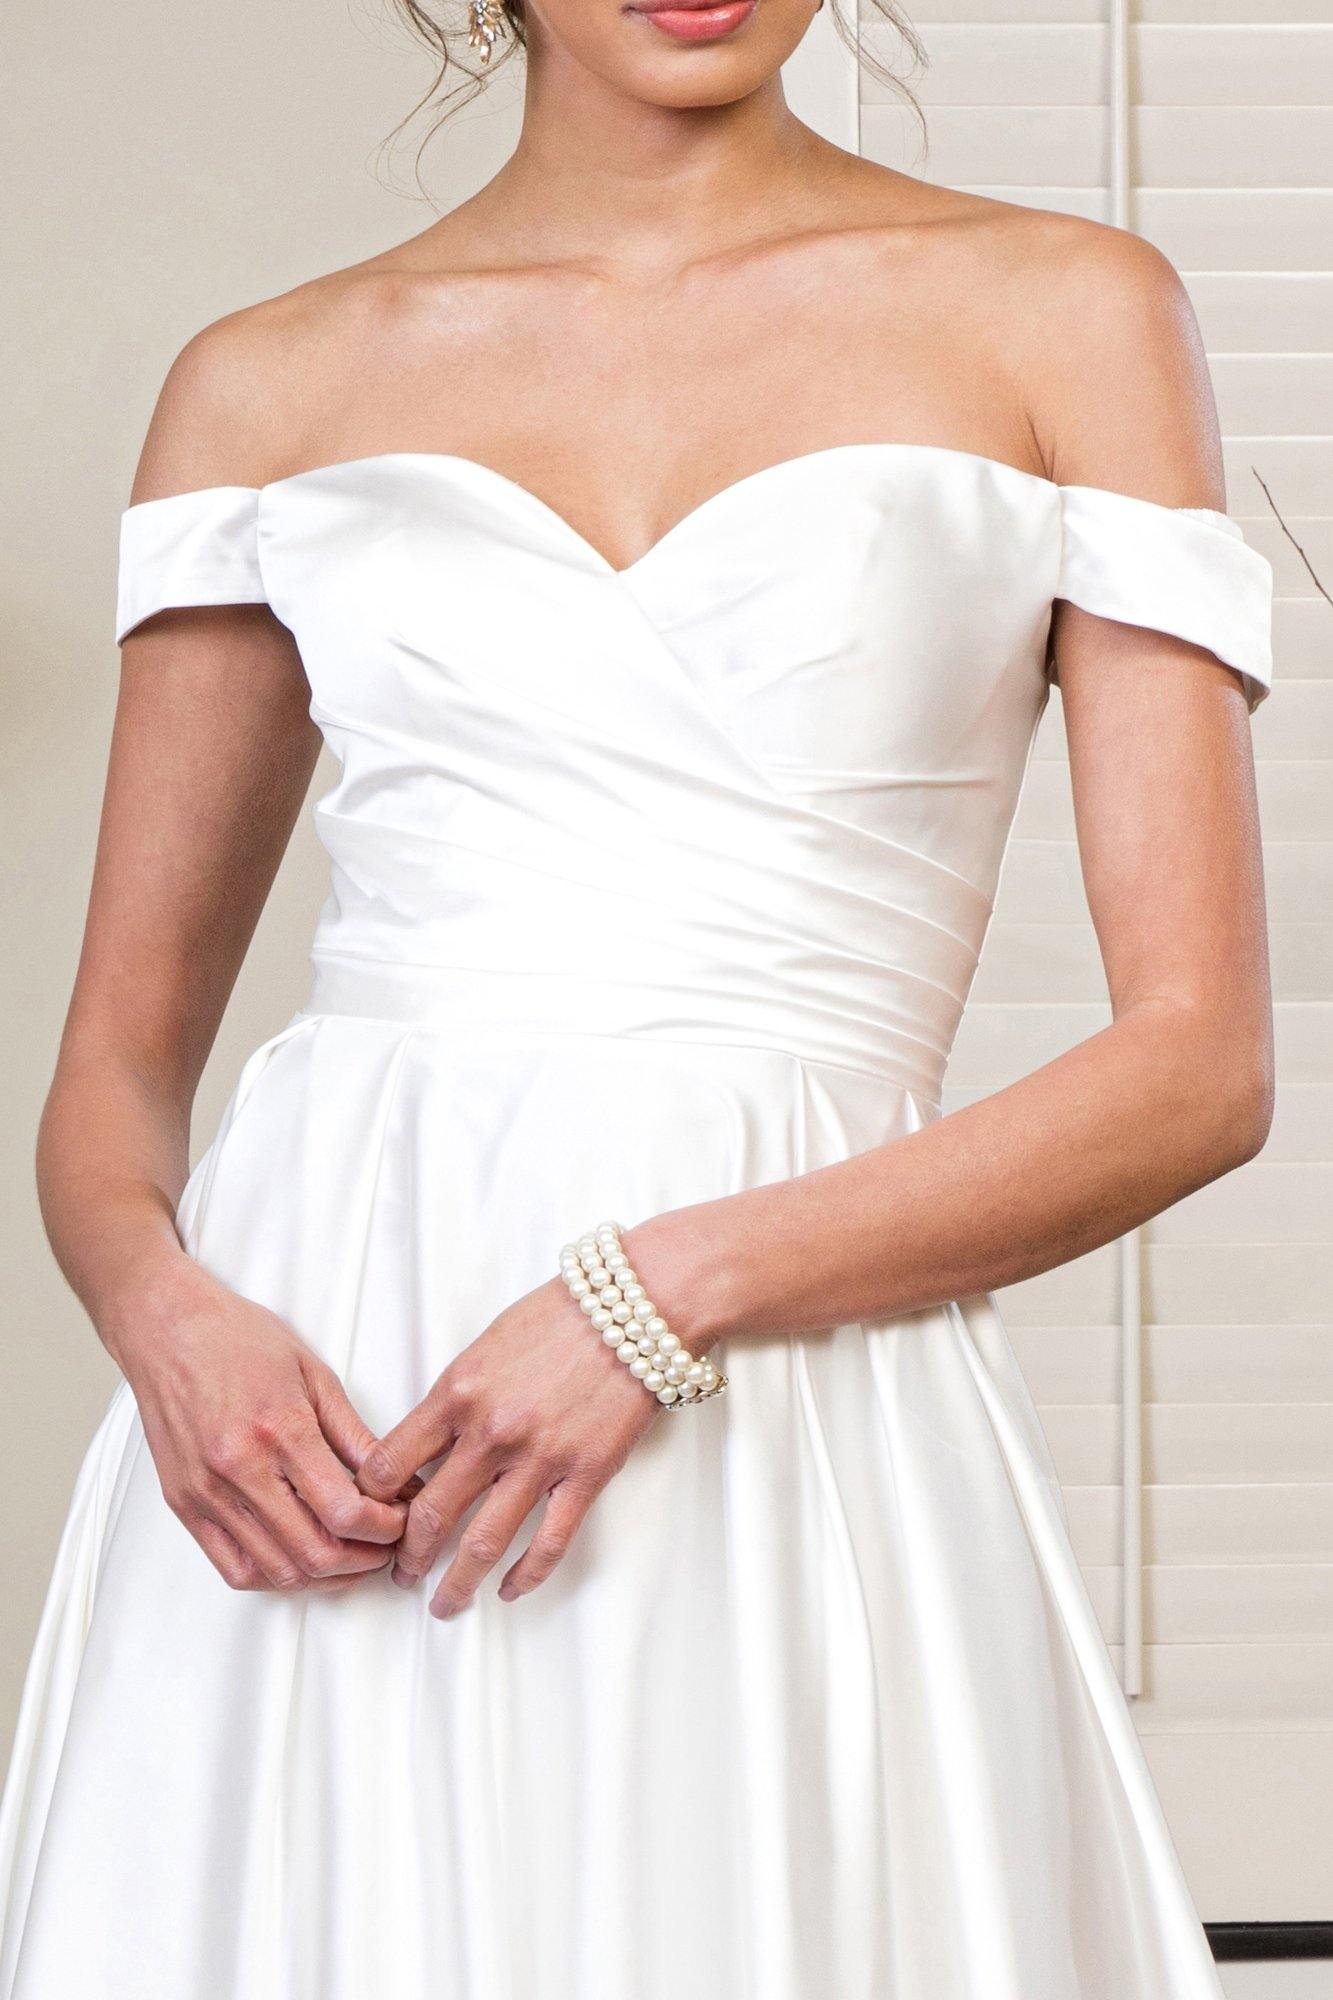 Long Off Shoulder A Line Wedding Gown - The Dress Outlet